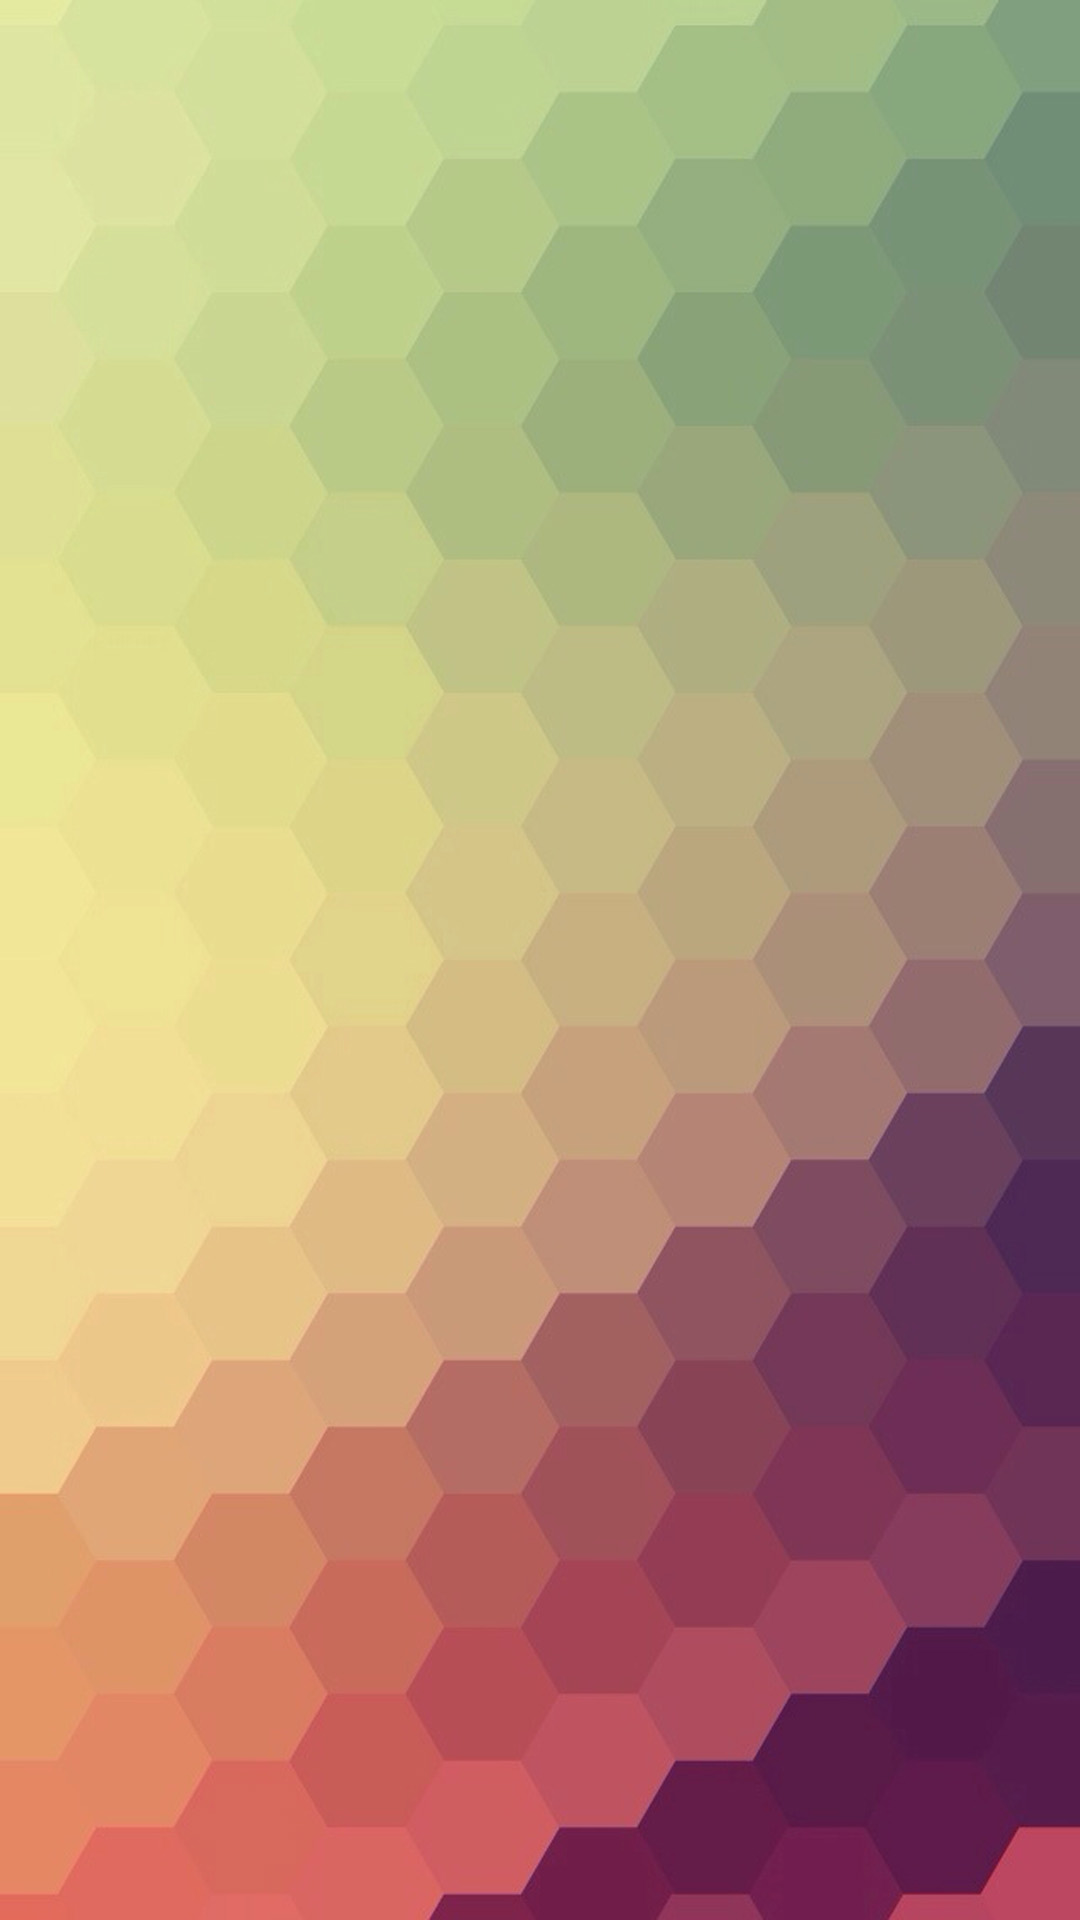 Gradient Honeycomb Wallpapers for Galaxy S5.jpg